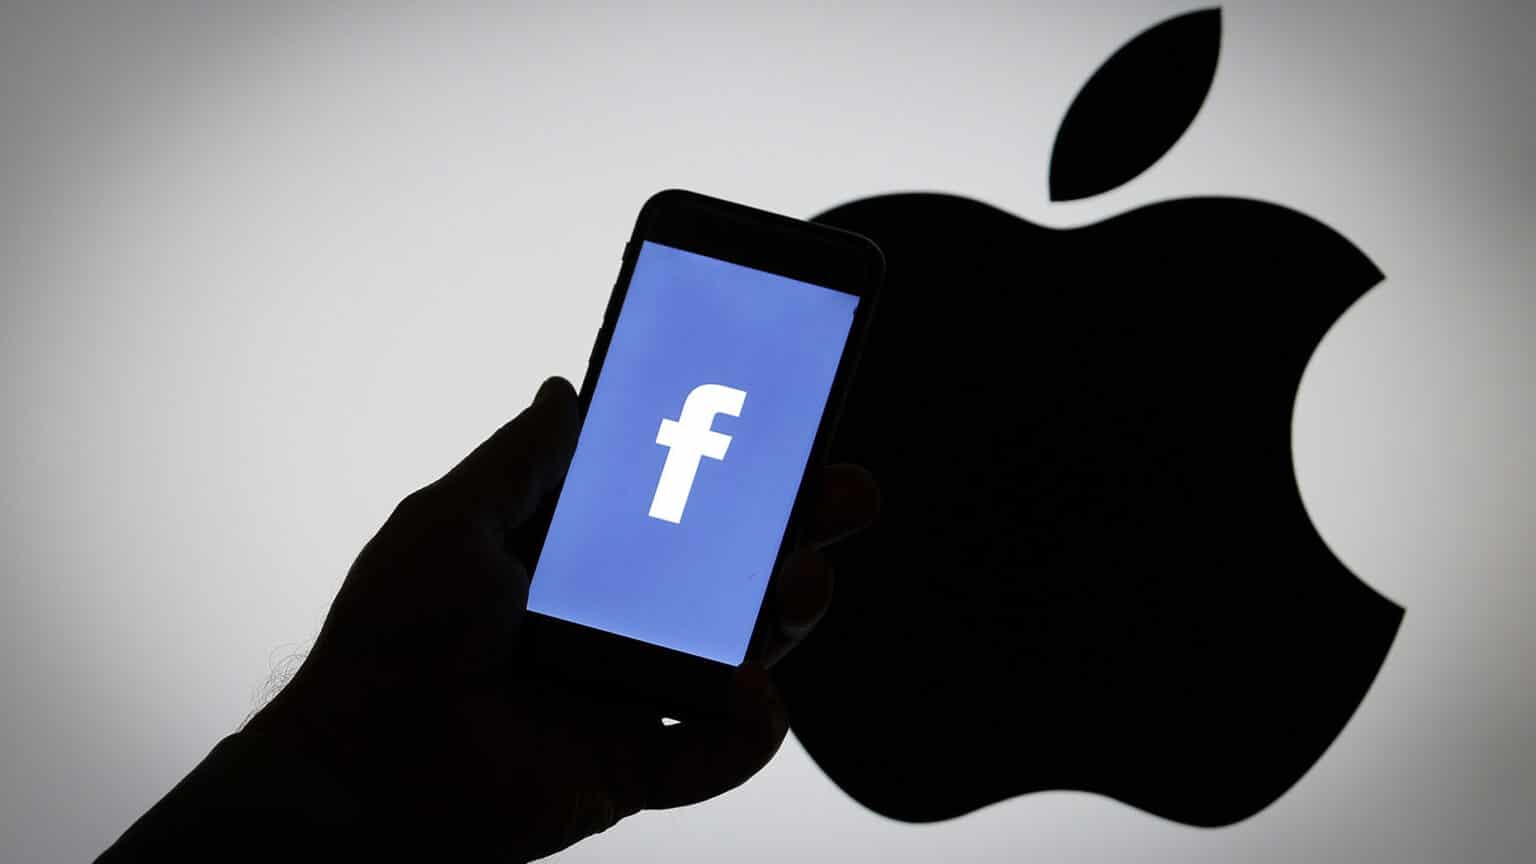 Facebook Apple feud raised after dispute made it to public over users data